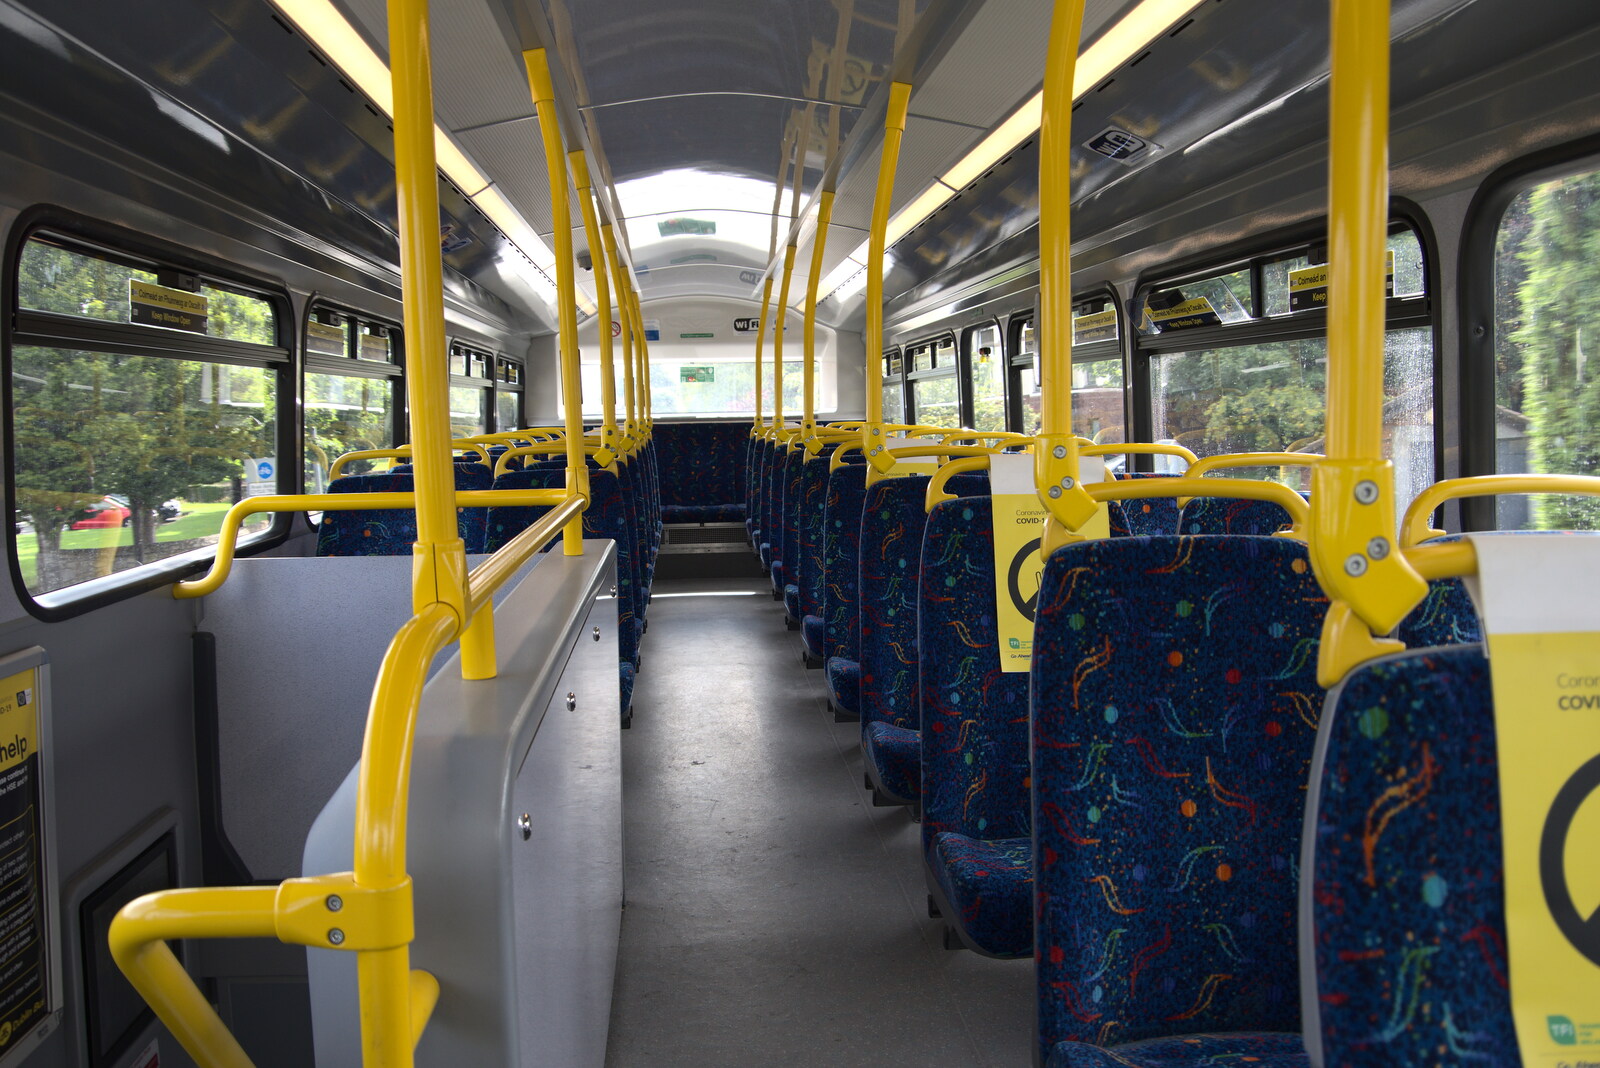 The upstairs of the bus is deserted from A Trip to Noddy's, and Dublin City Centre, Wicklow and Dublin, Ireland - 16th August 2021